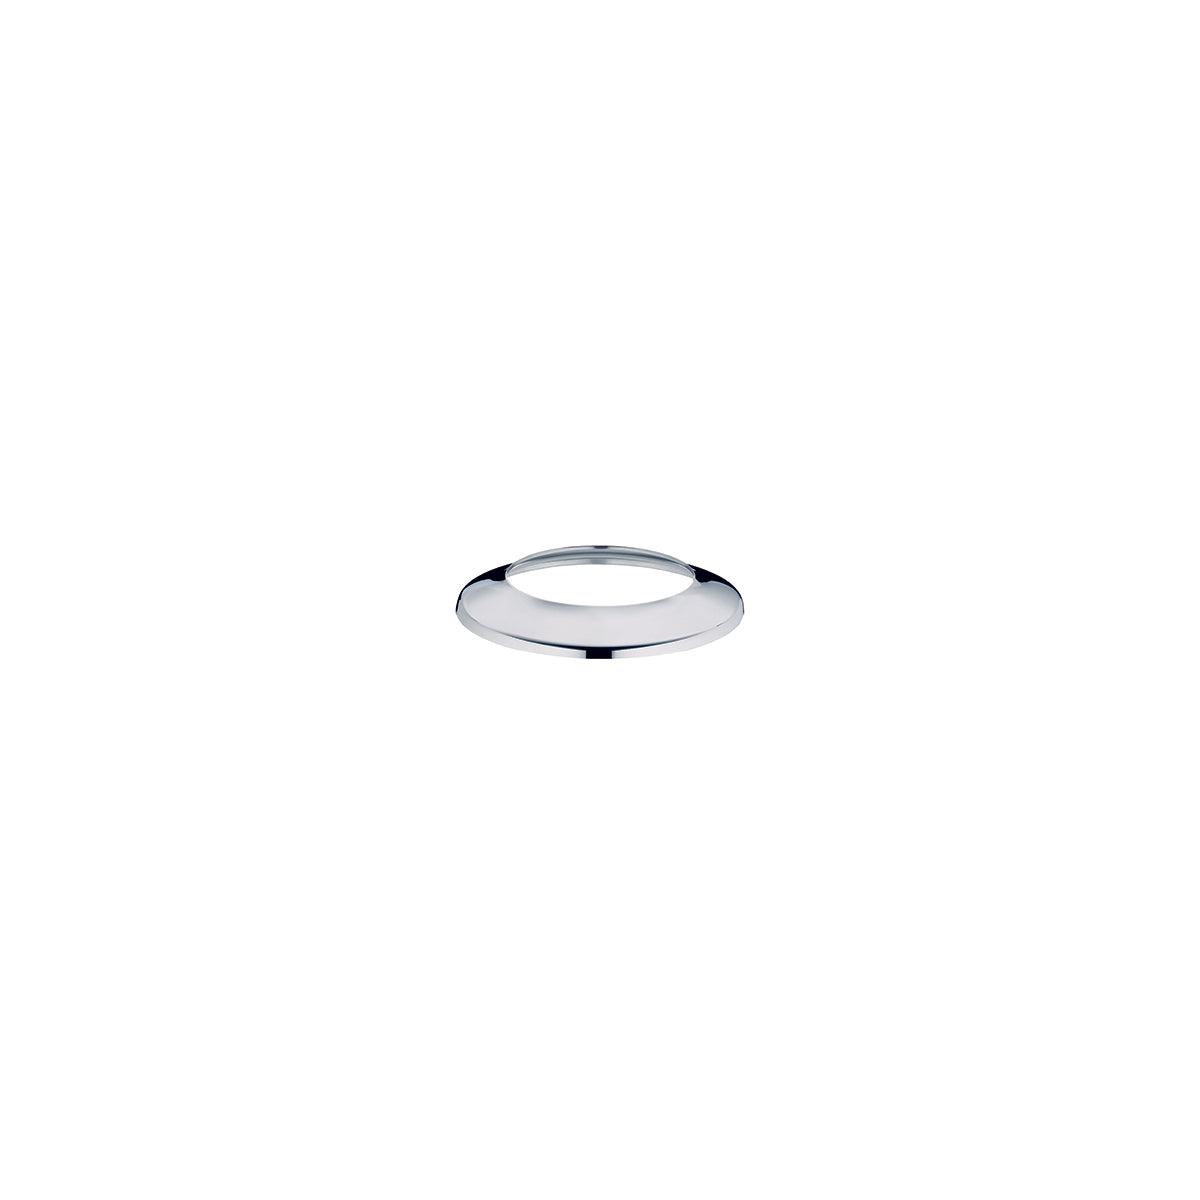 19.3853.6445 WMF Classic ChillCup Ring Silverplated Tomkin Australia Hospitality Supplies